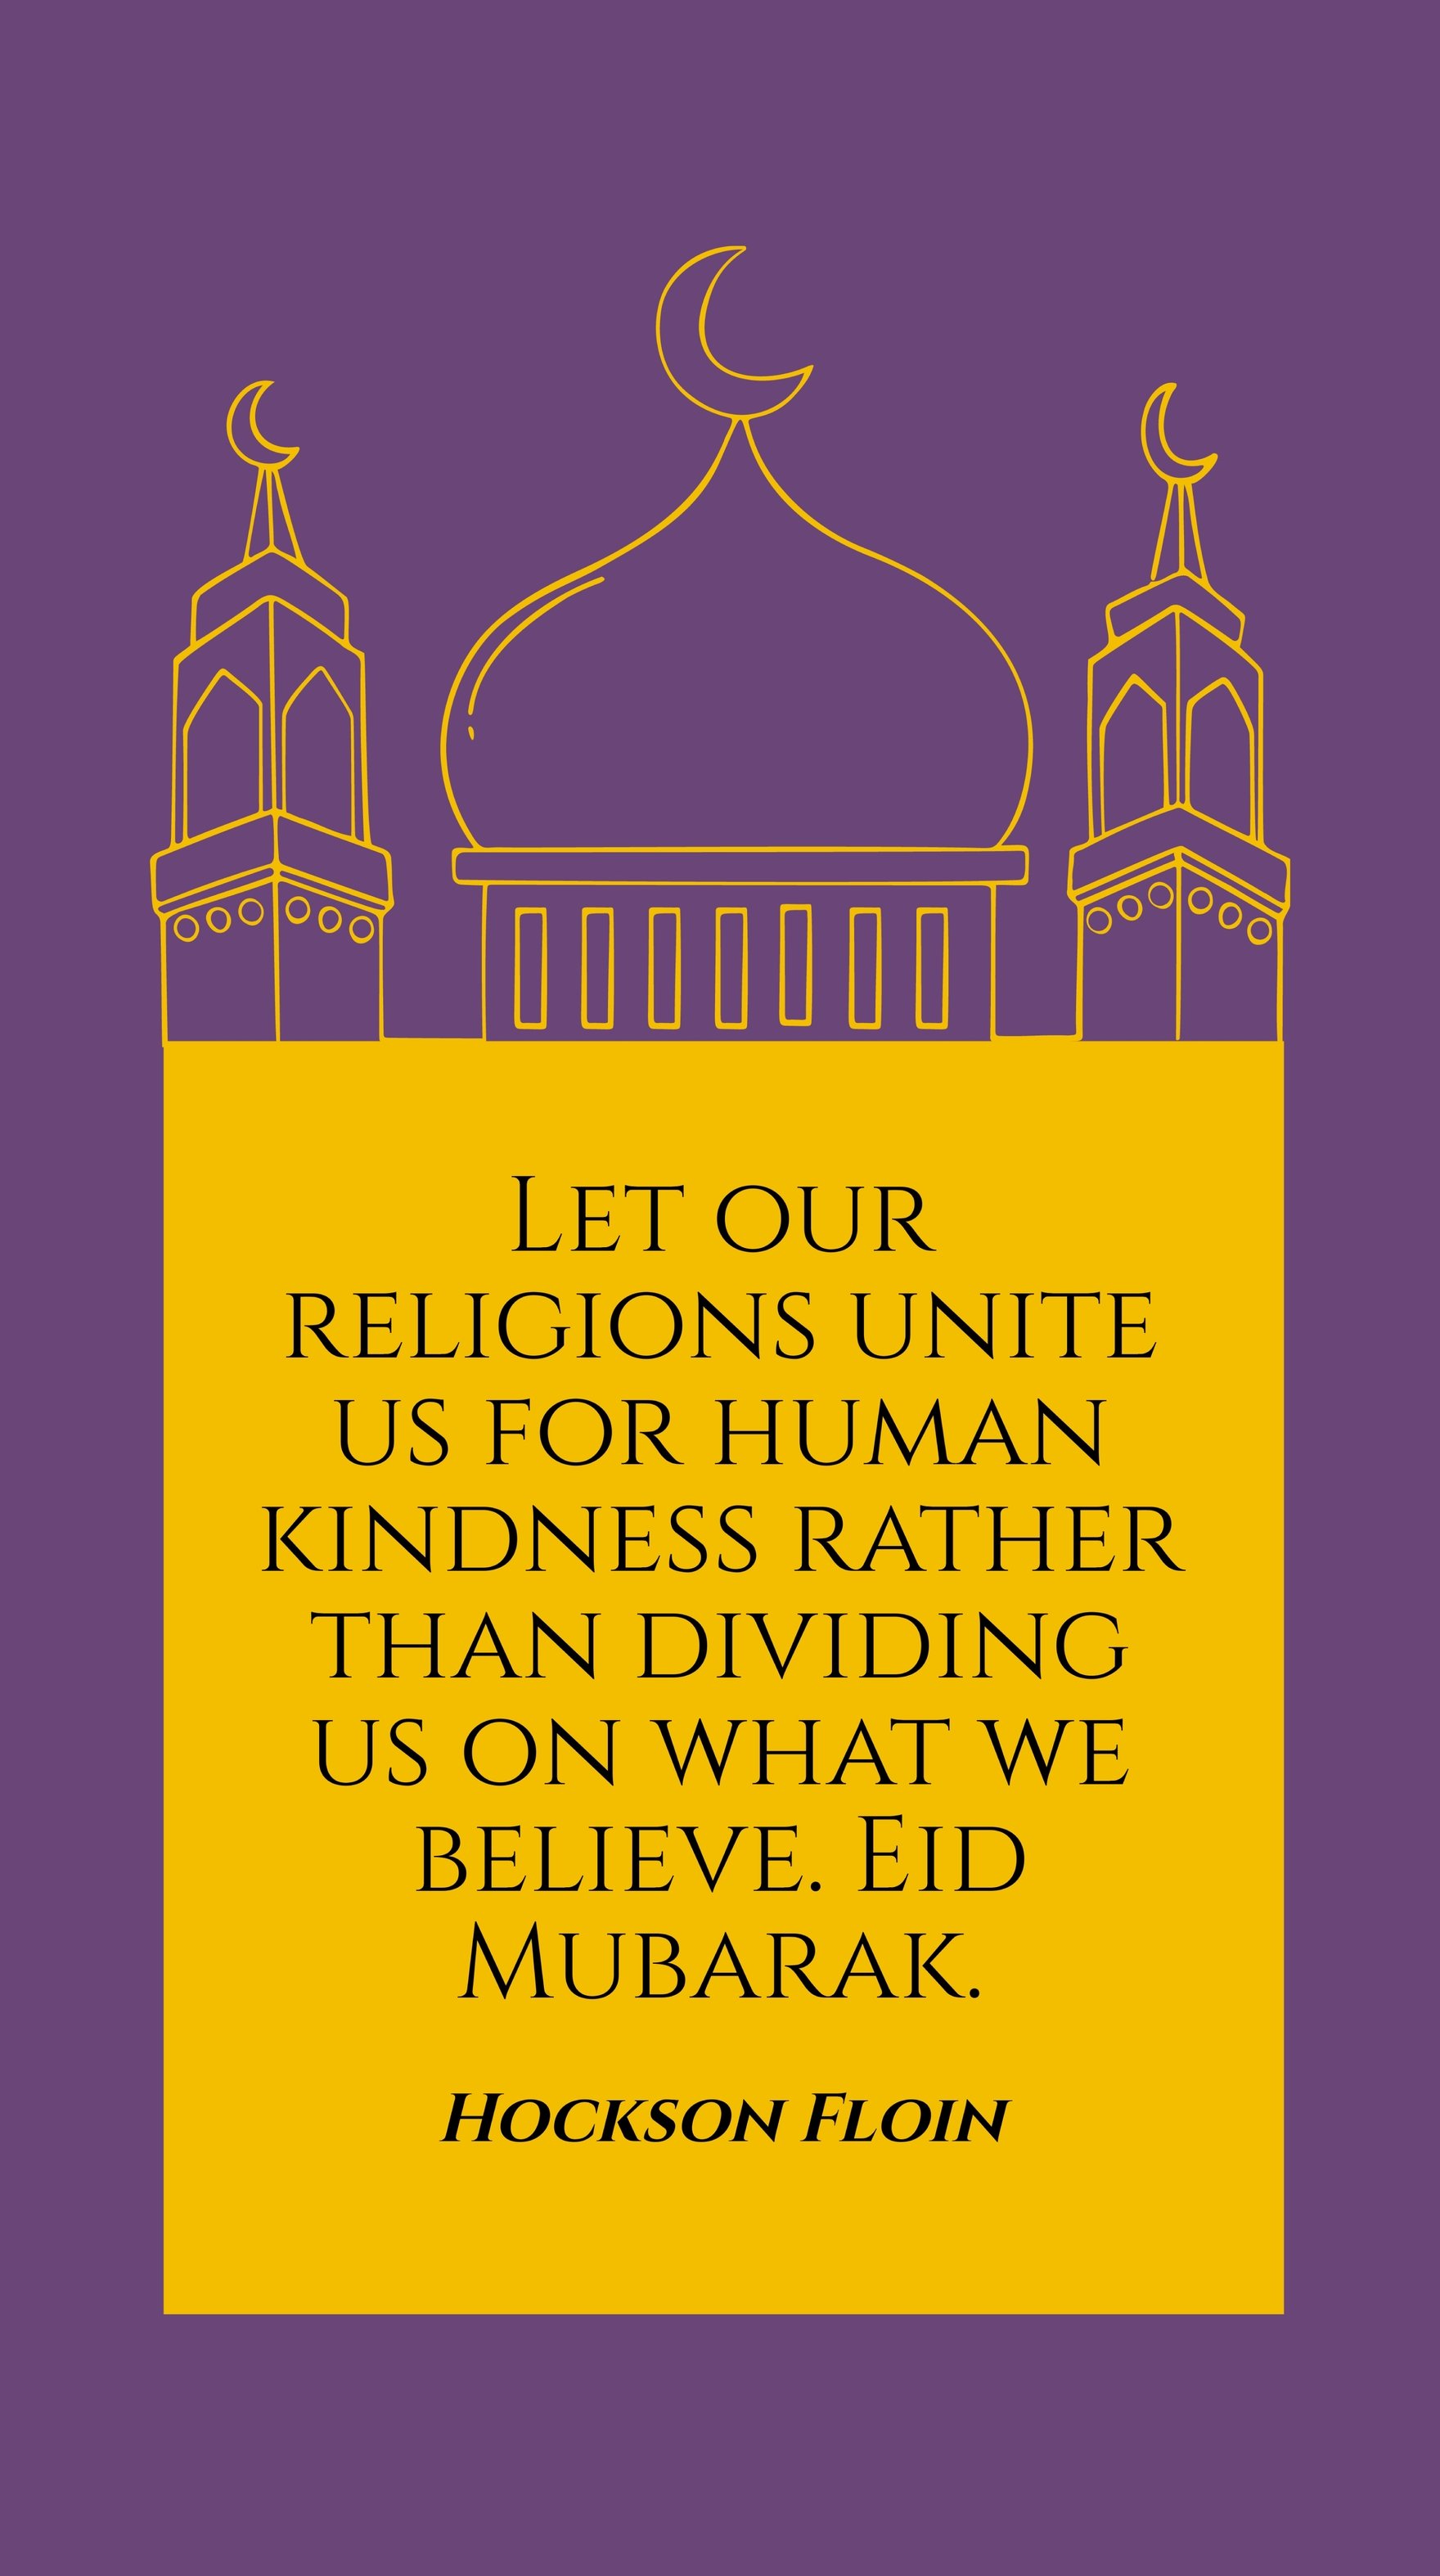 Hockson Floin - Let our religions unite us for human kindness rather than dividing us on what we believe. Eid Mubarak. in JPG